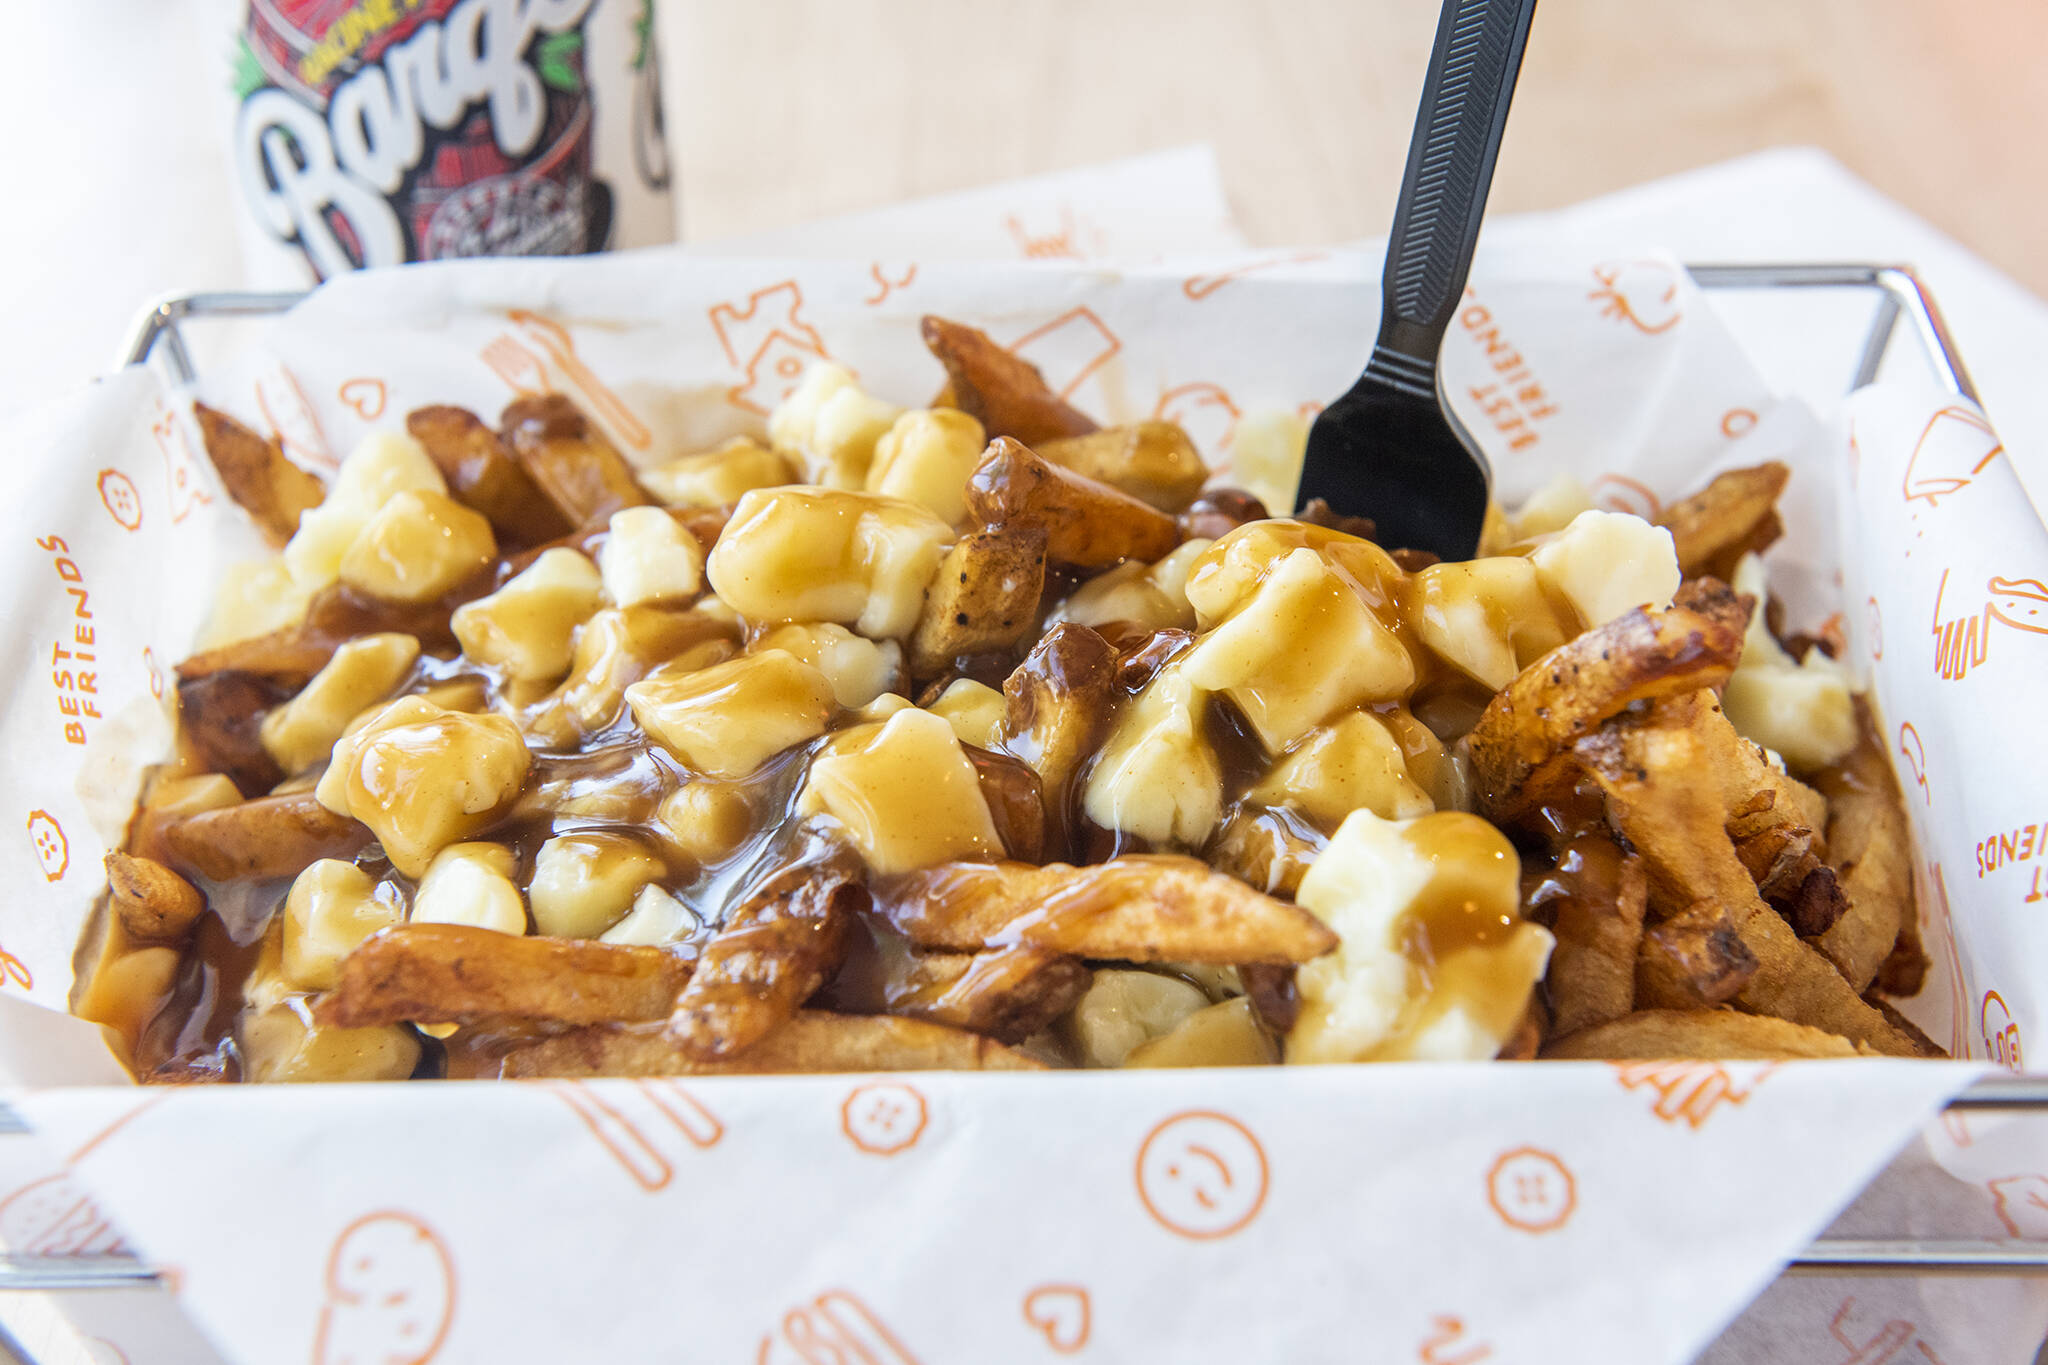 The Best Poutine in Toronto